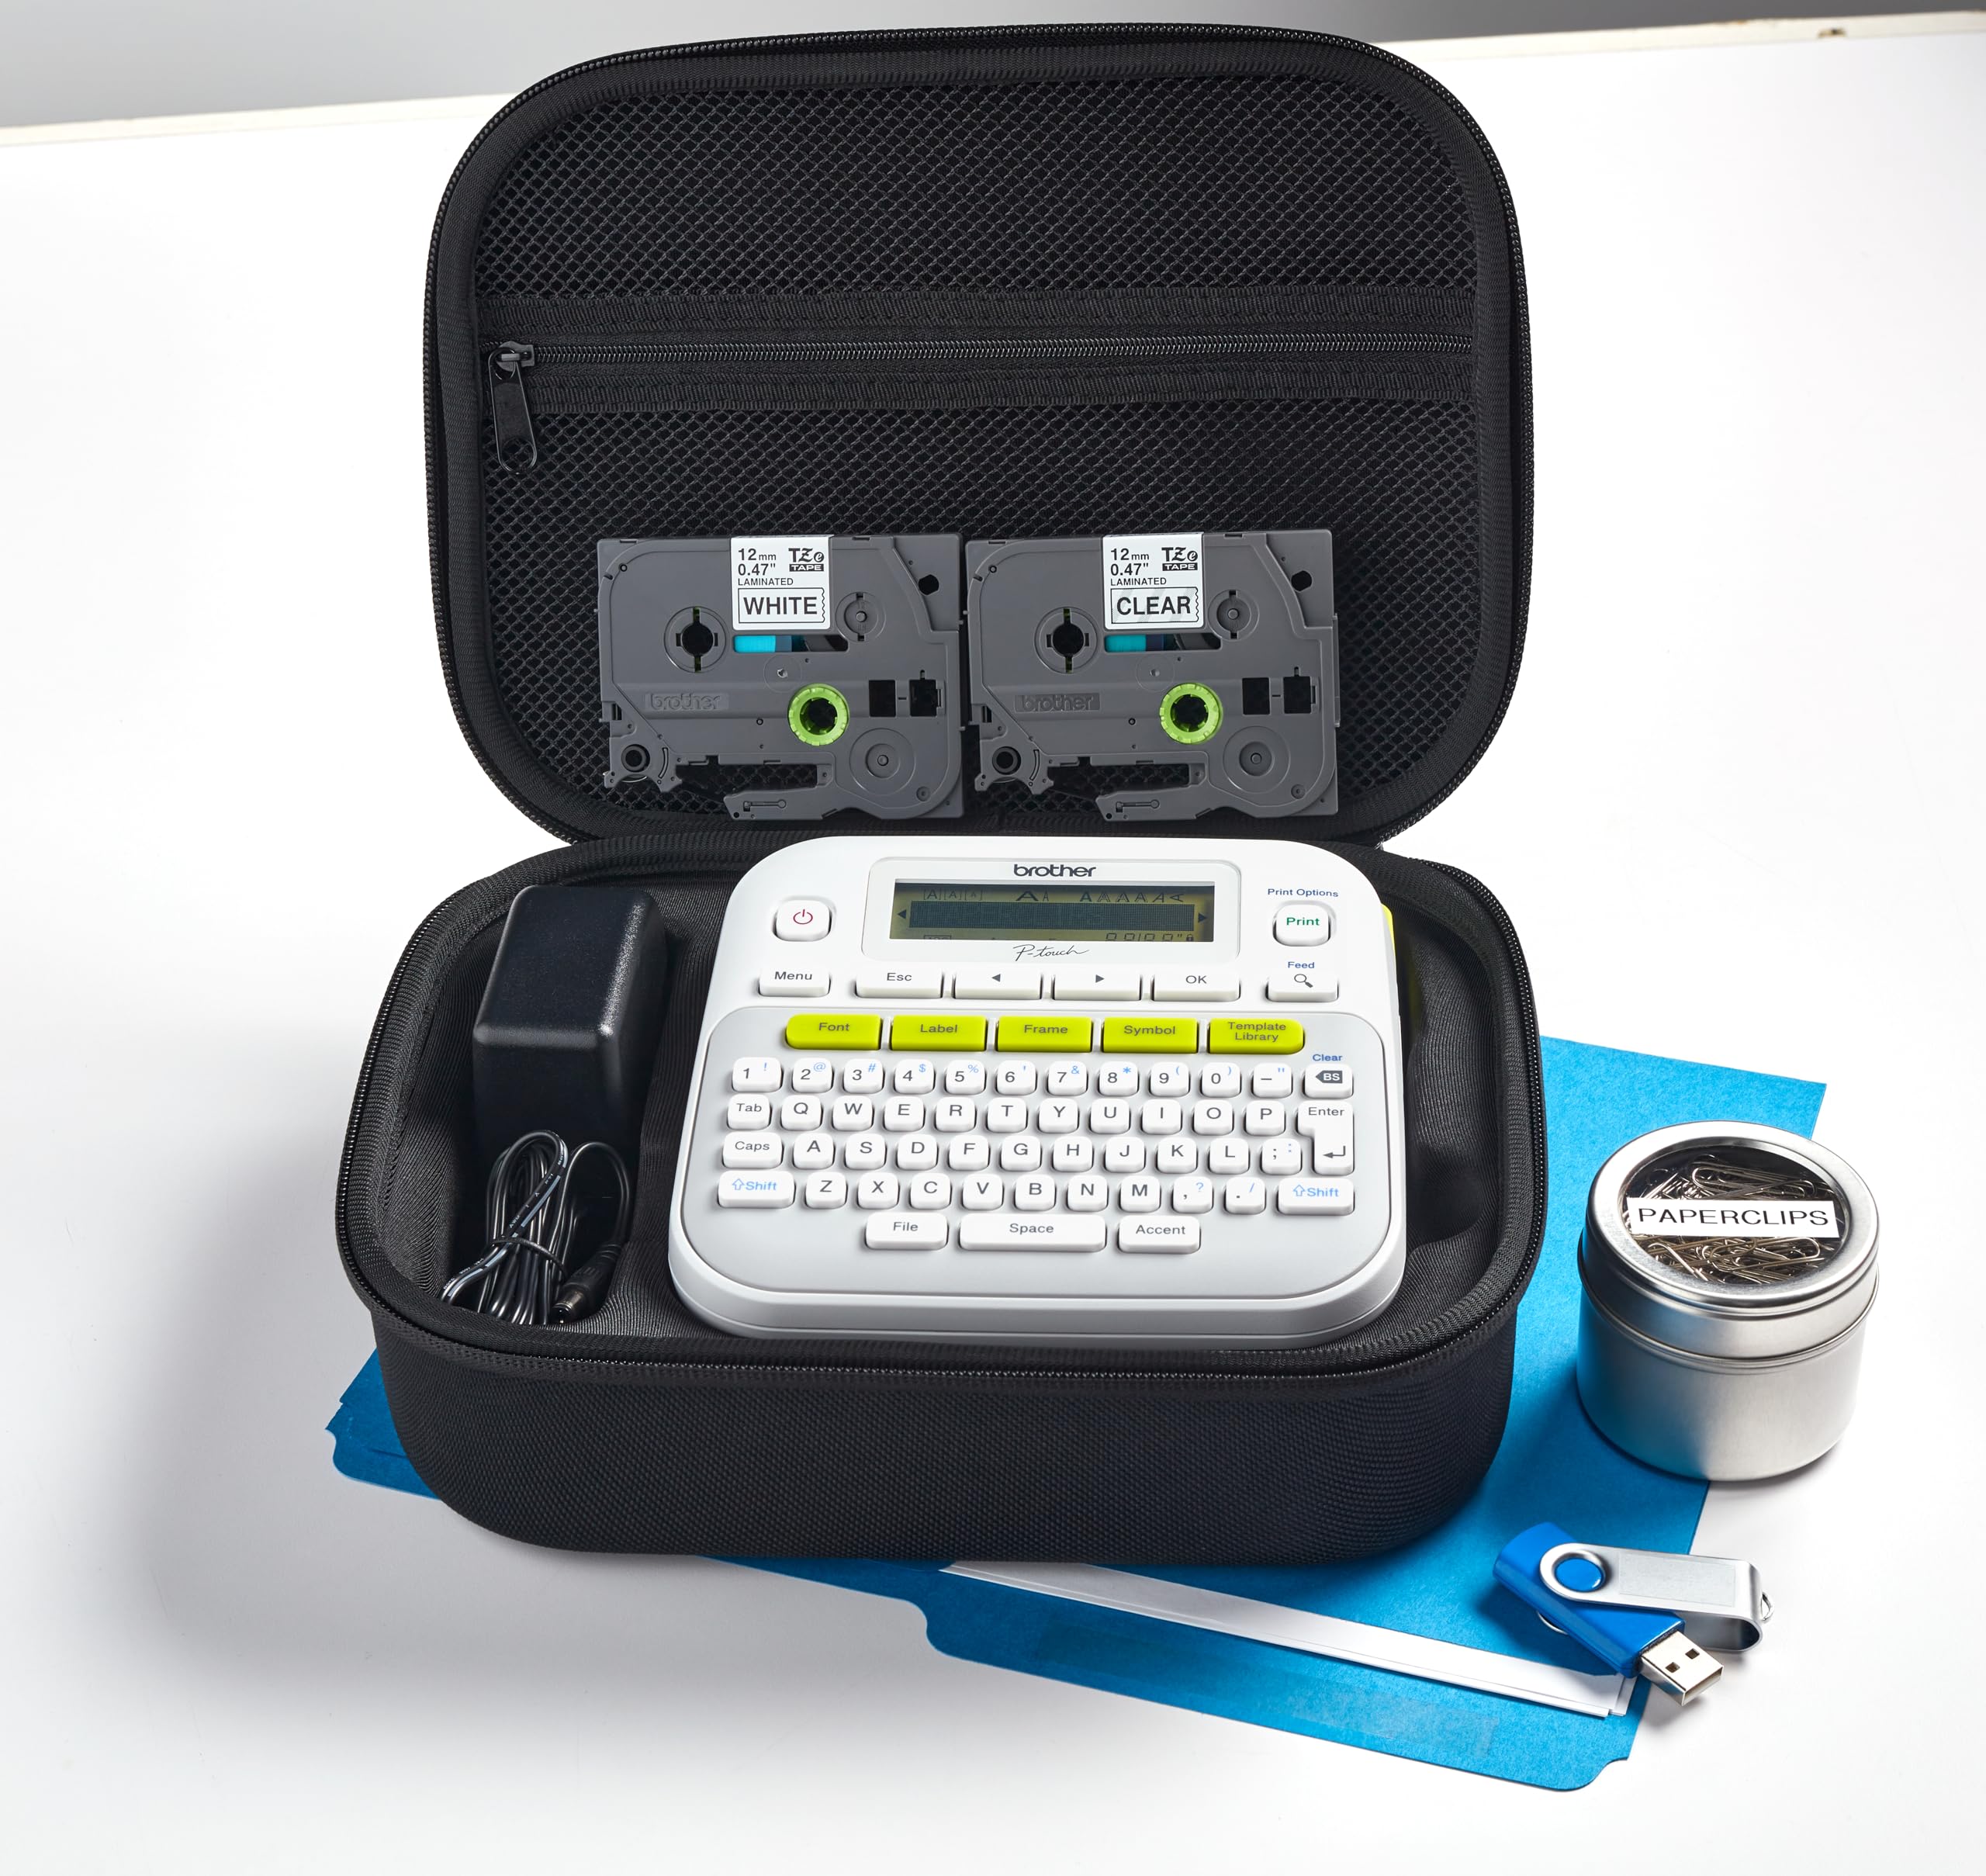 Brother PT-D210SV Label Maker Bonus Bundle Comes with a Protective Carrying case, an Adapter, and Two Sample Genuine TZe Label Tapes for Added Value.